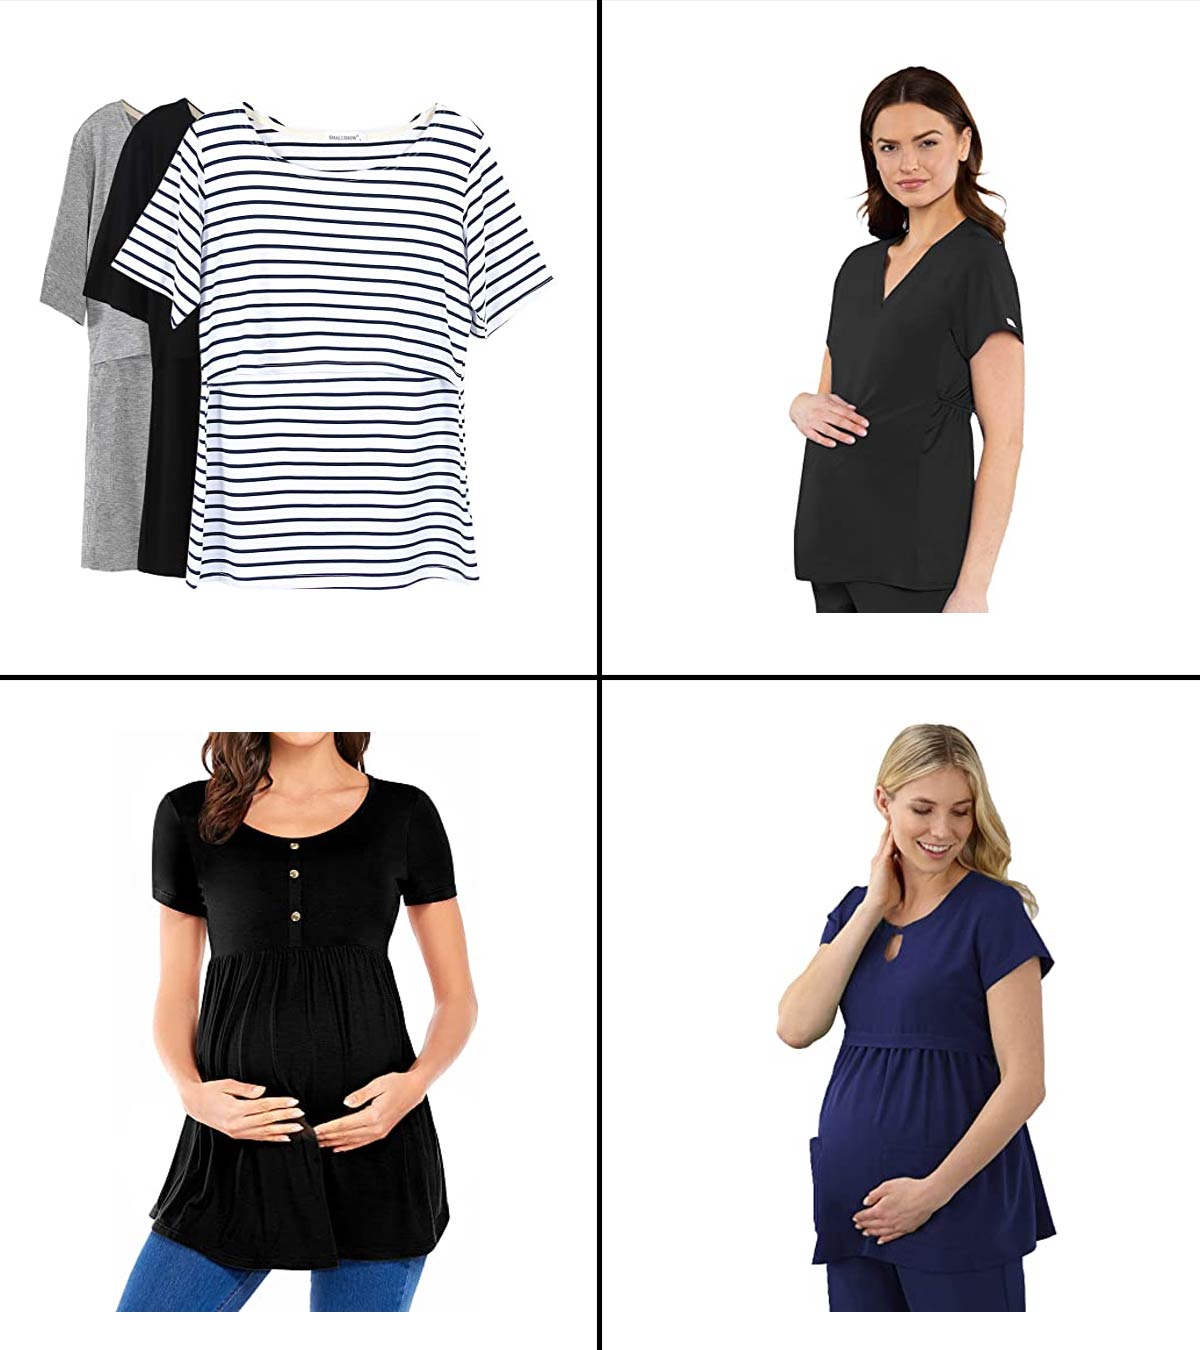 Rnxrbb Women Maternity Long Sleeve Shirts Pregnancy Fall Tops Ruched Maternity Basic Clothes 